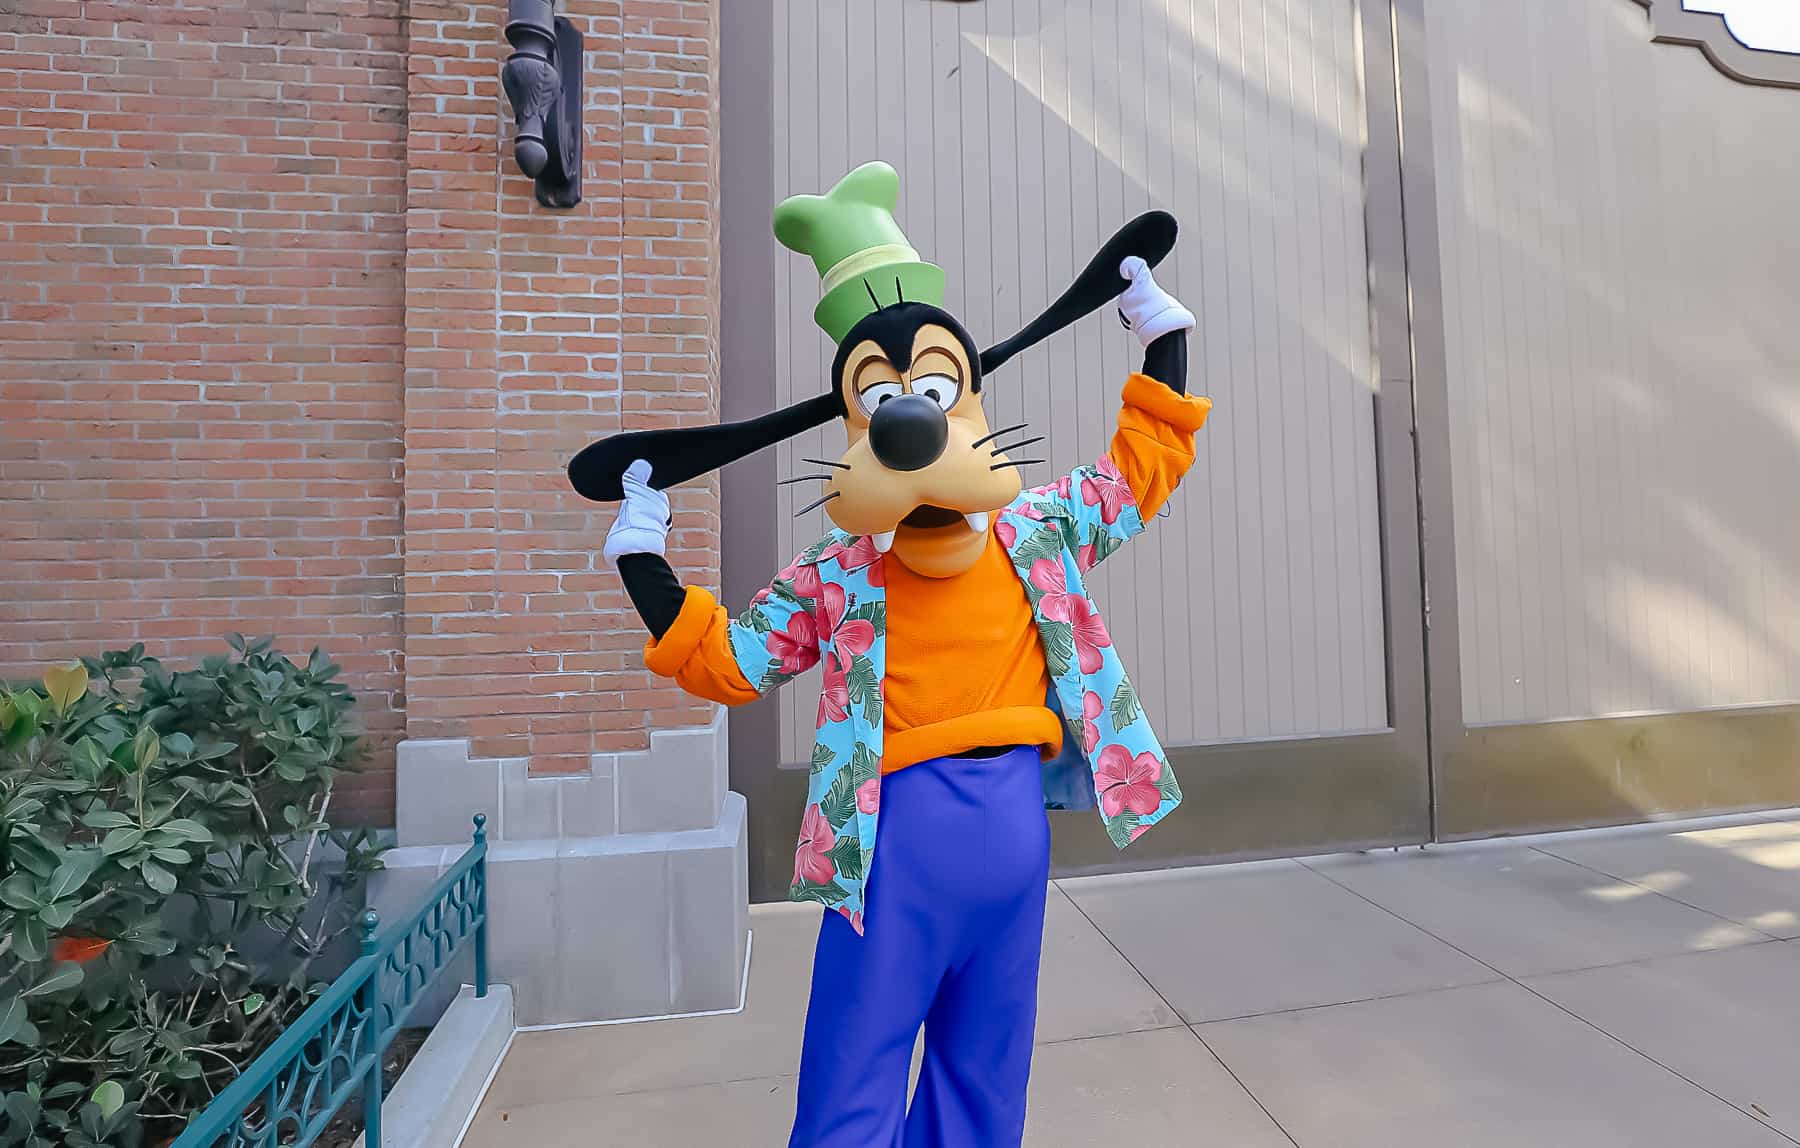 Goofy with a vacation shirt over his regular outfit. 